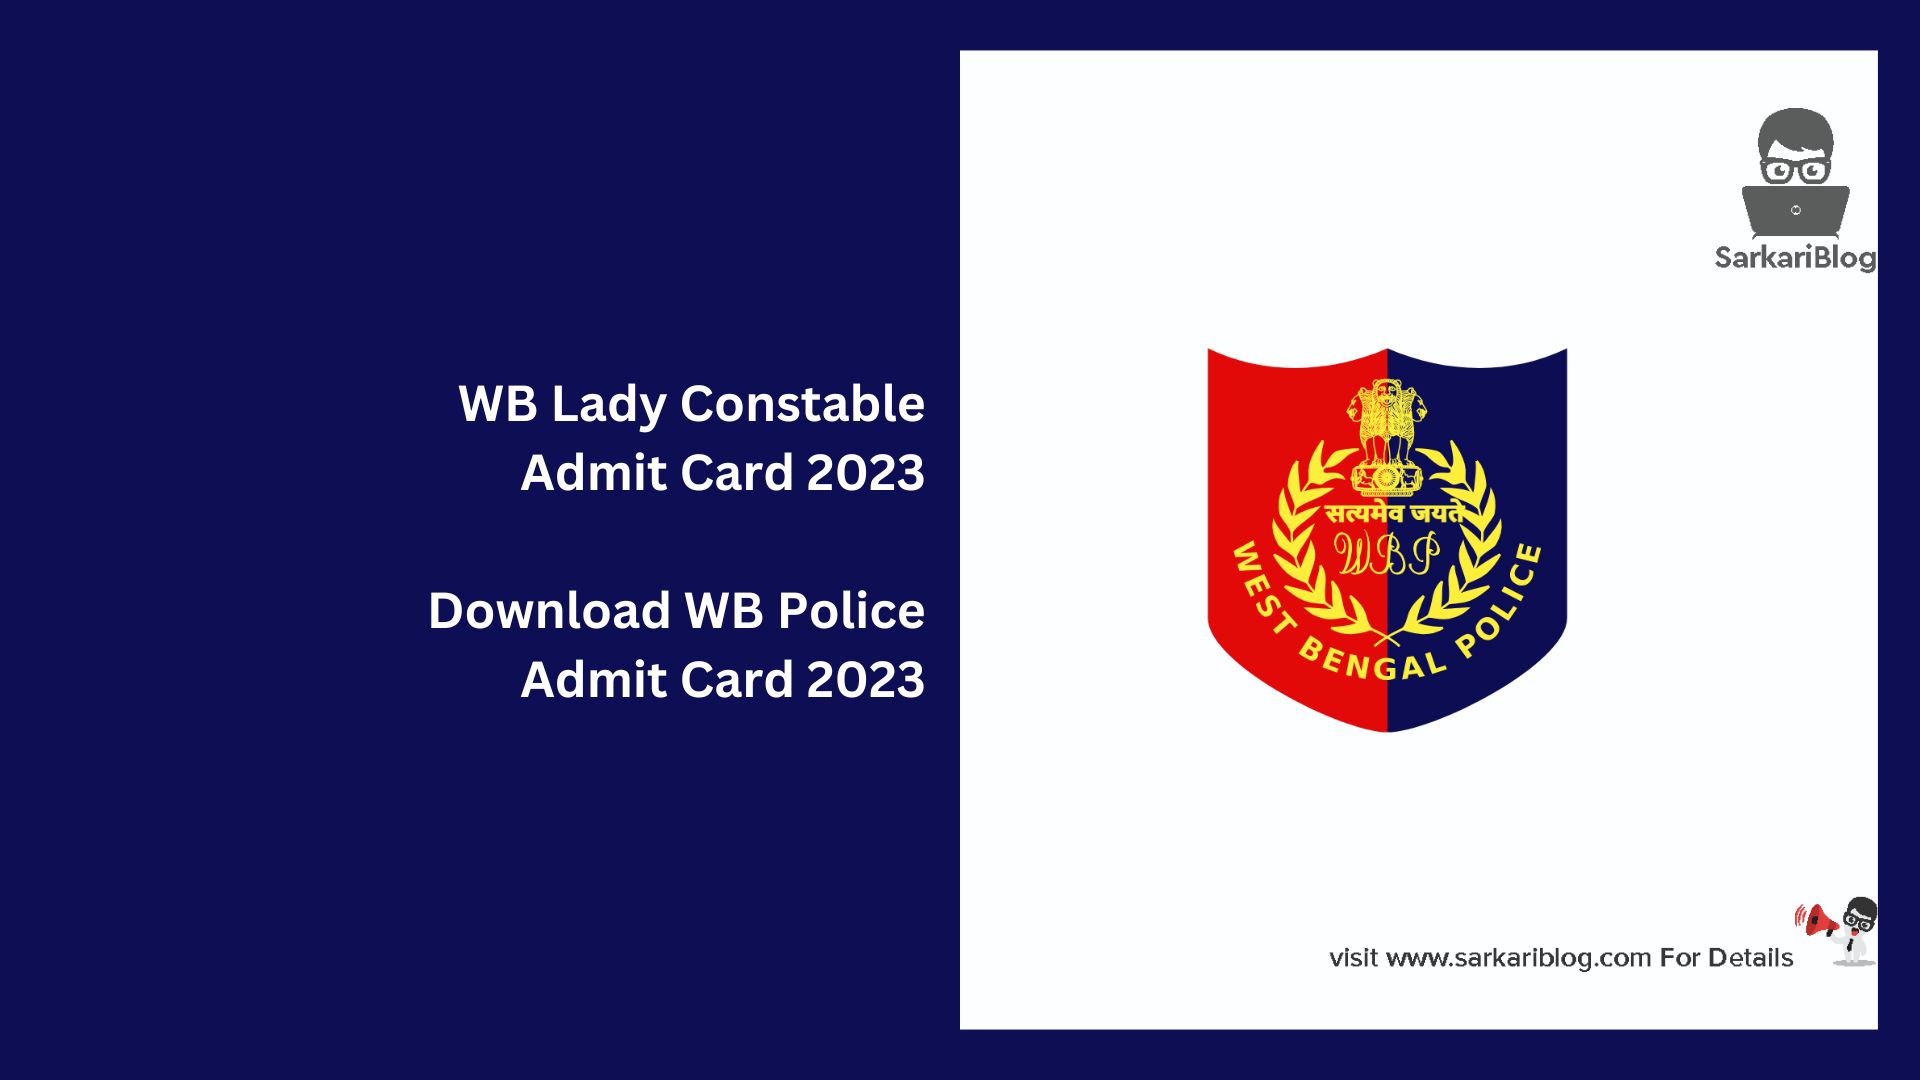 WB Lady Constable Admit Card 2023